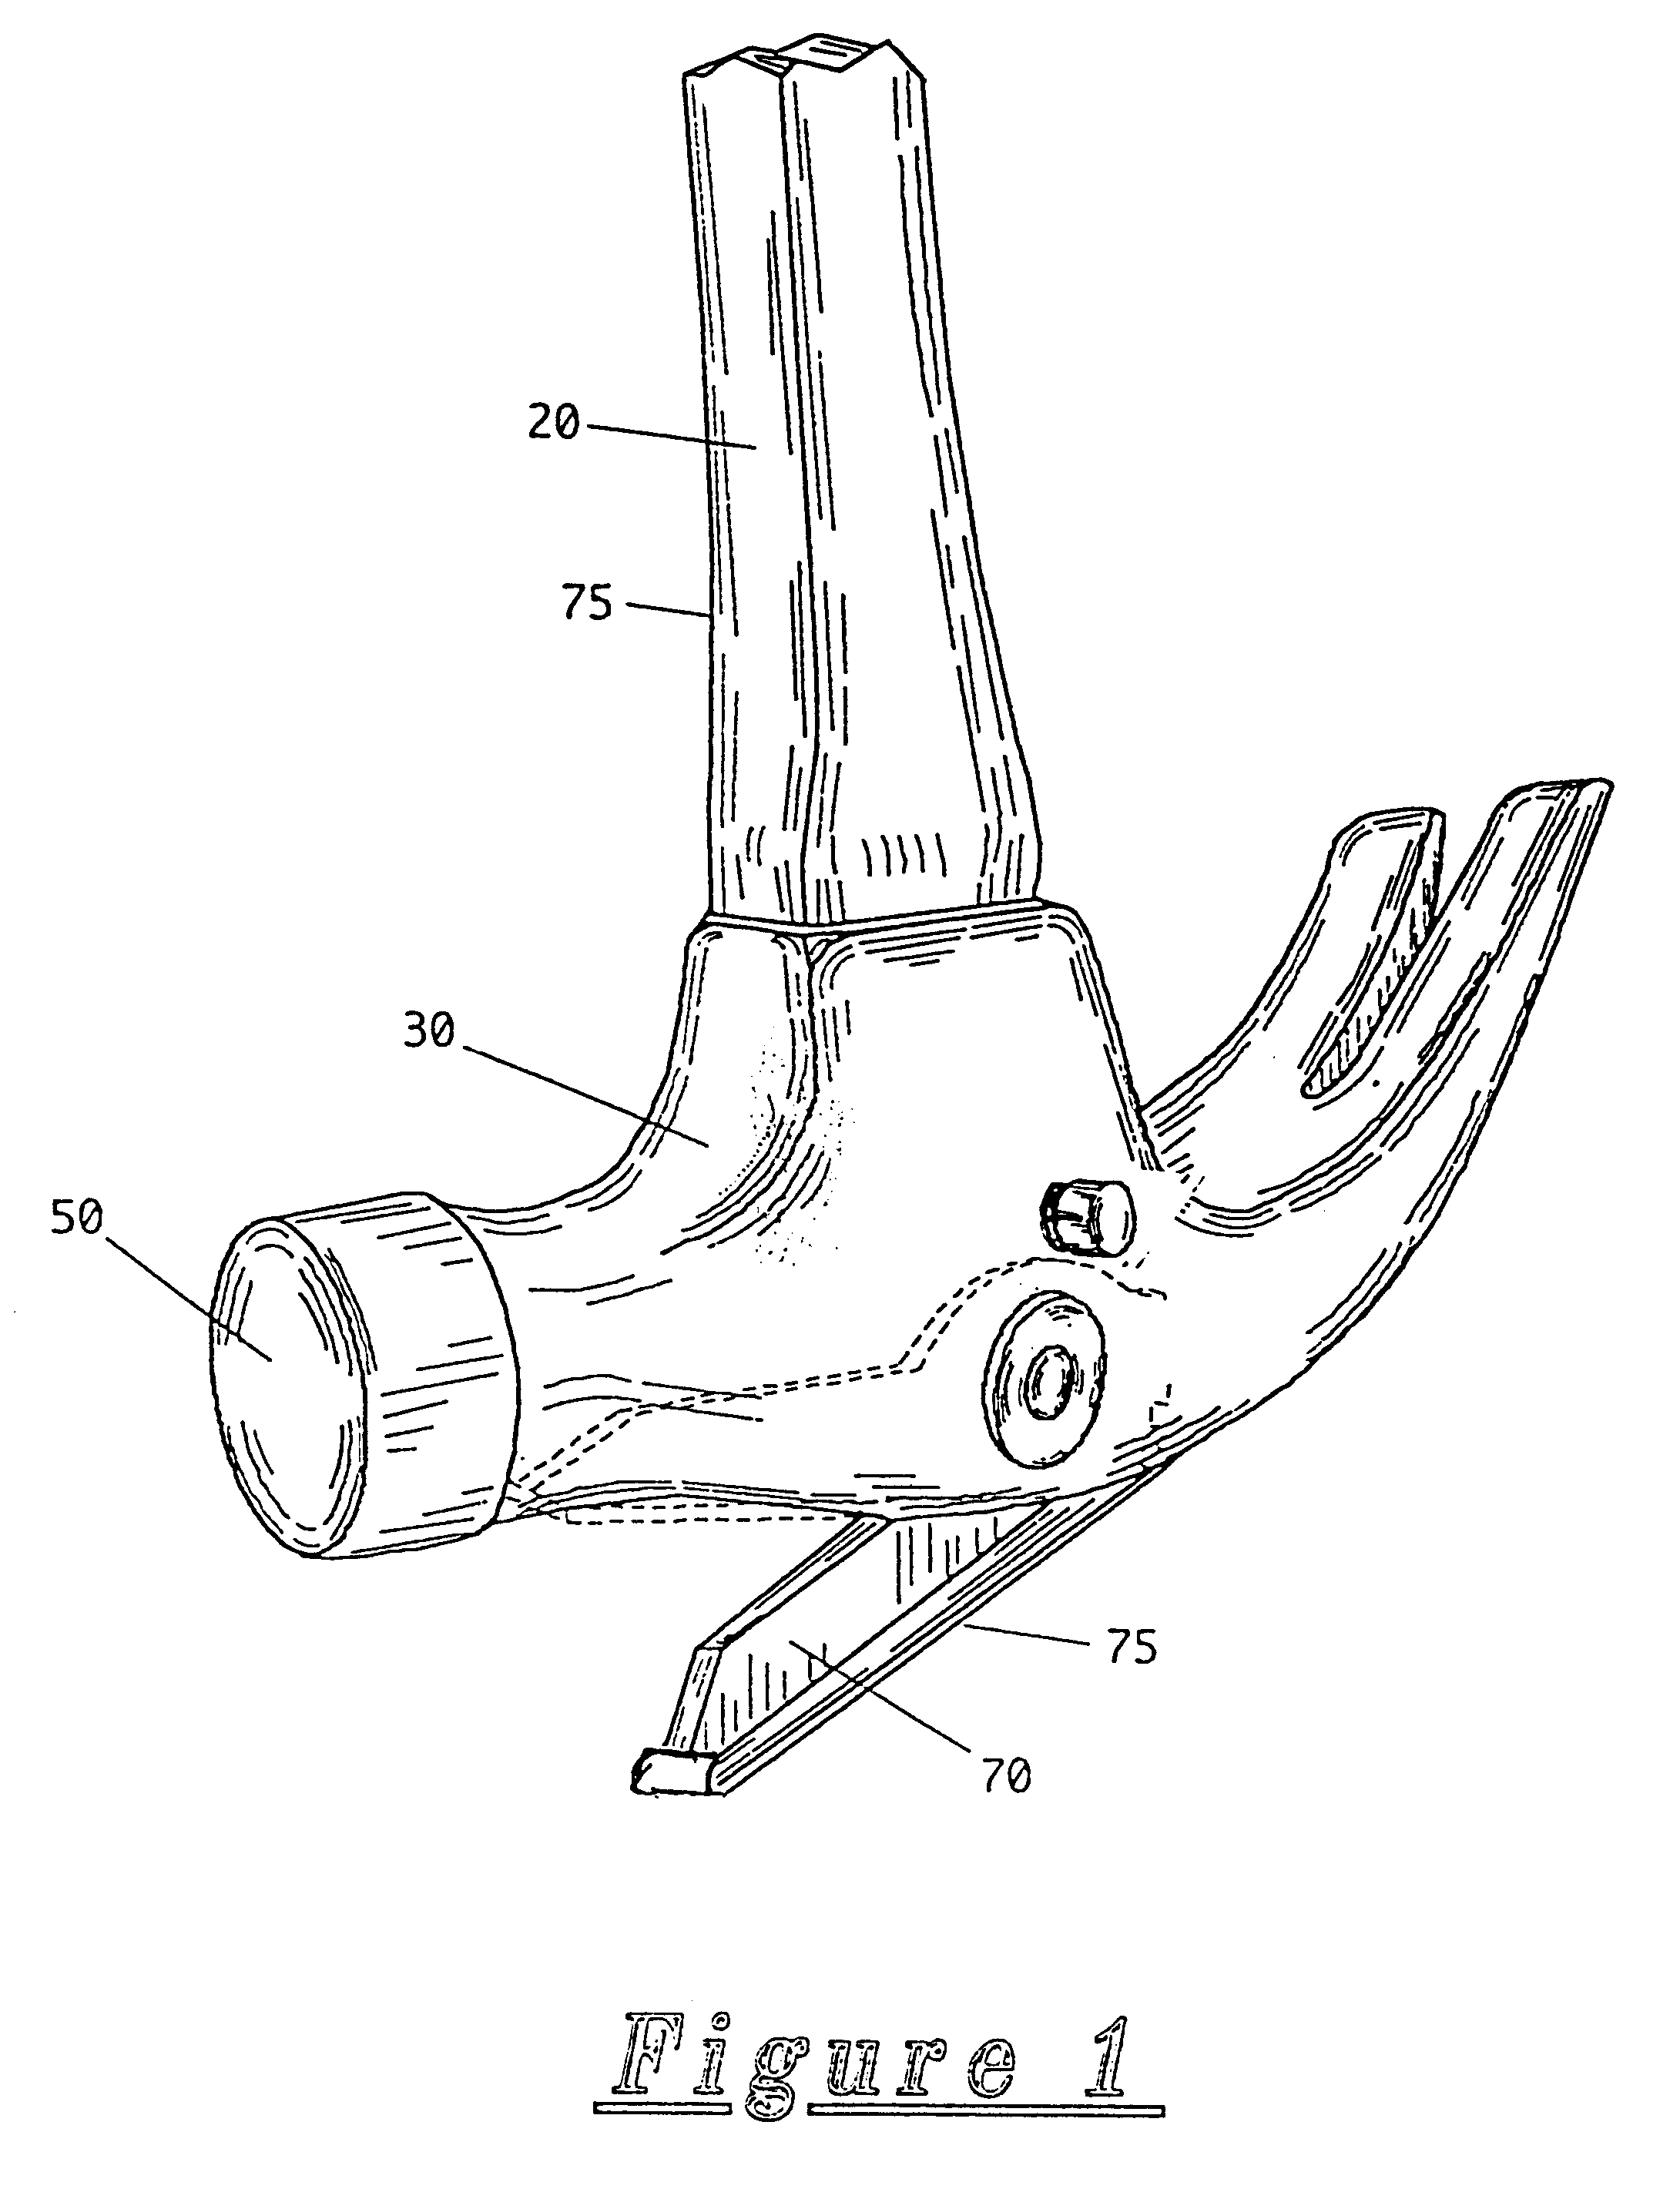 Hammer with integral lever mechanism